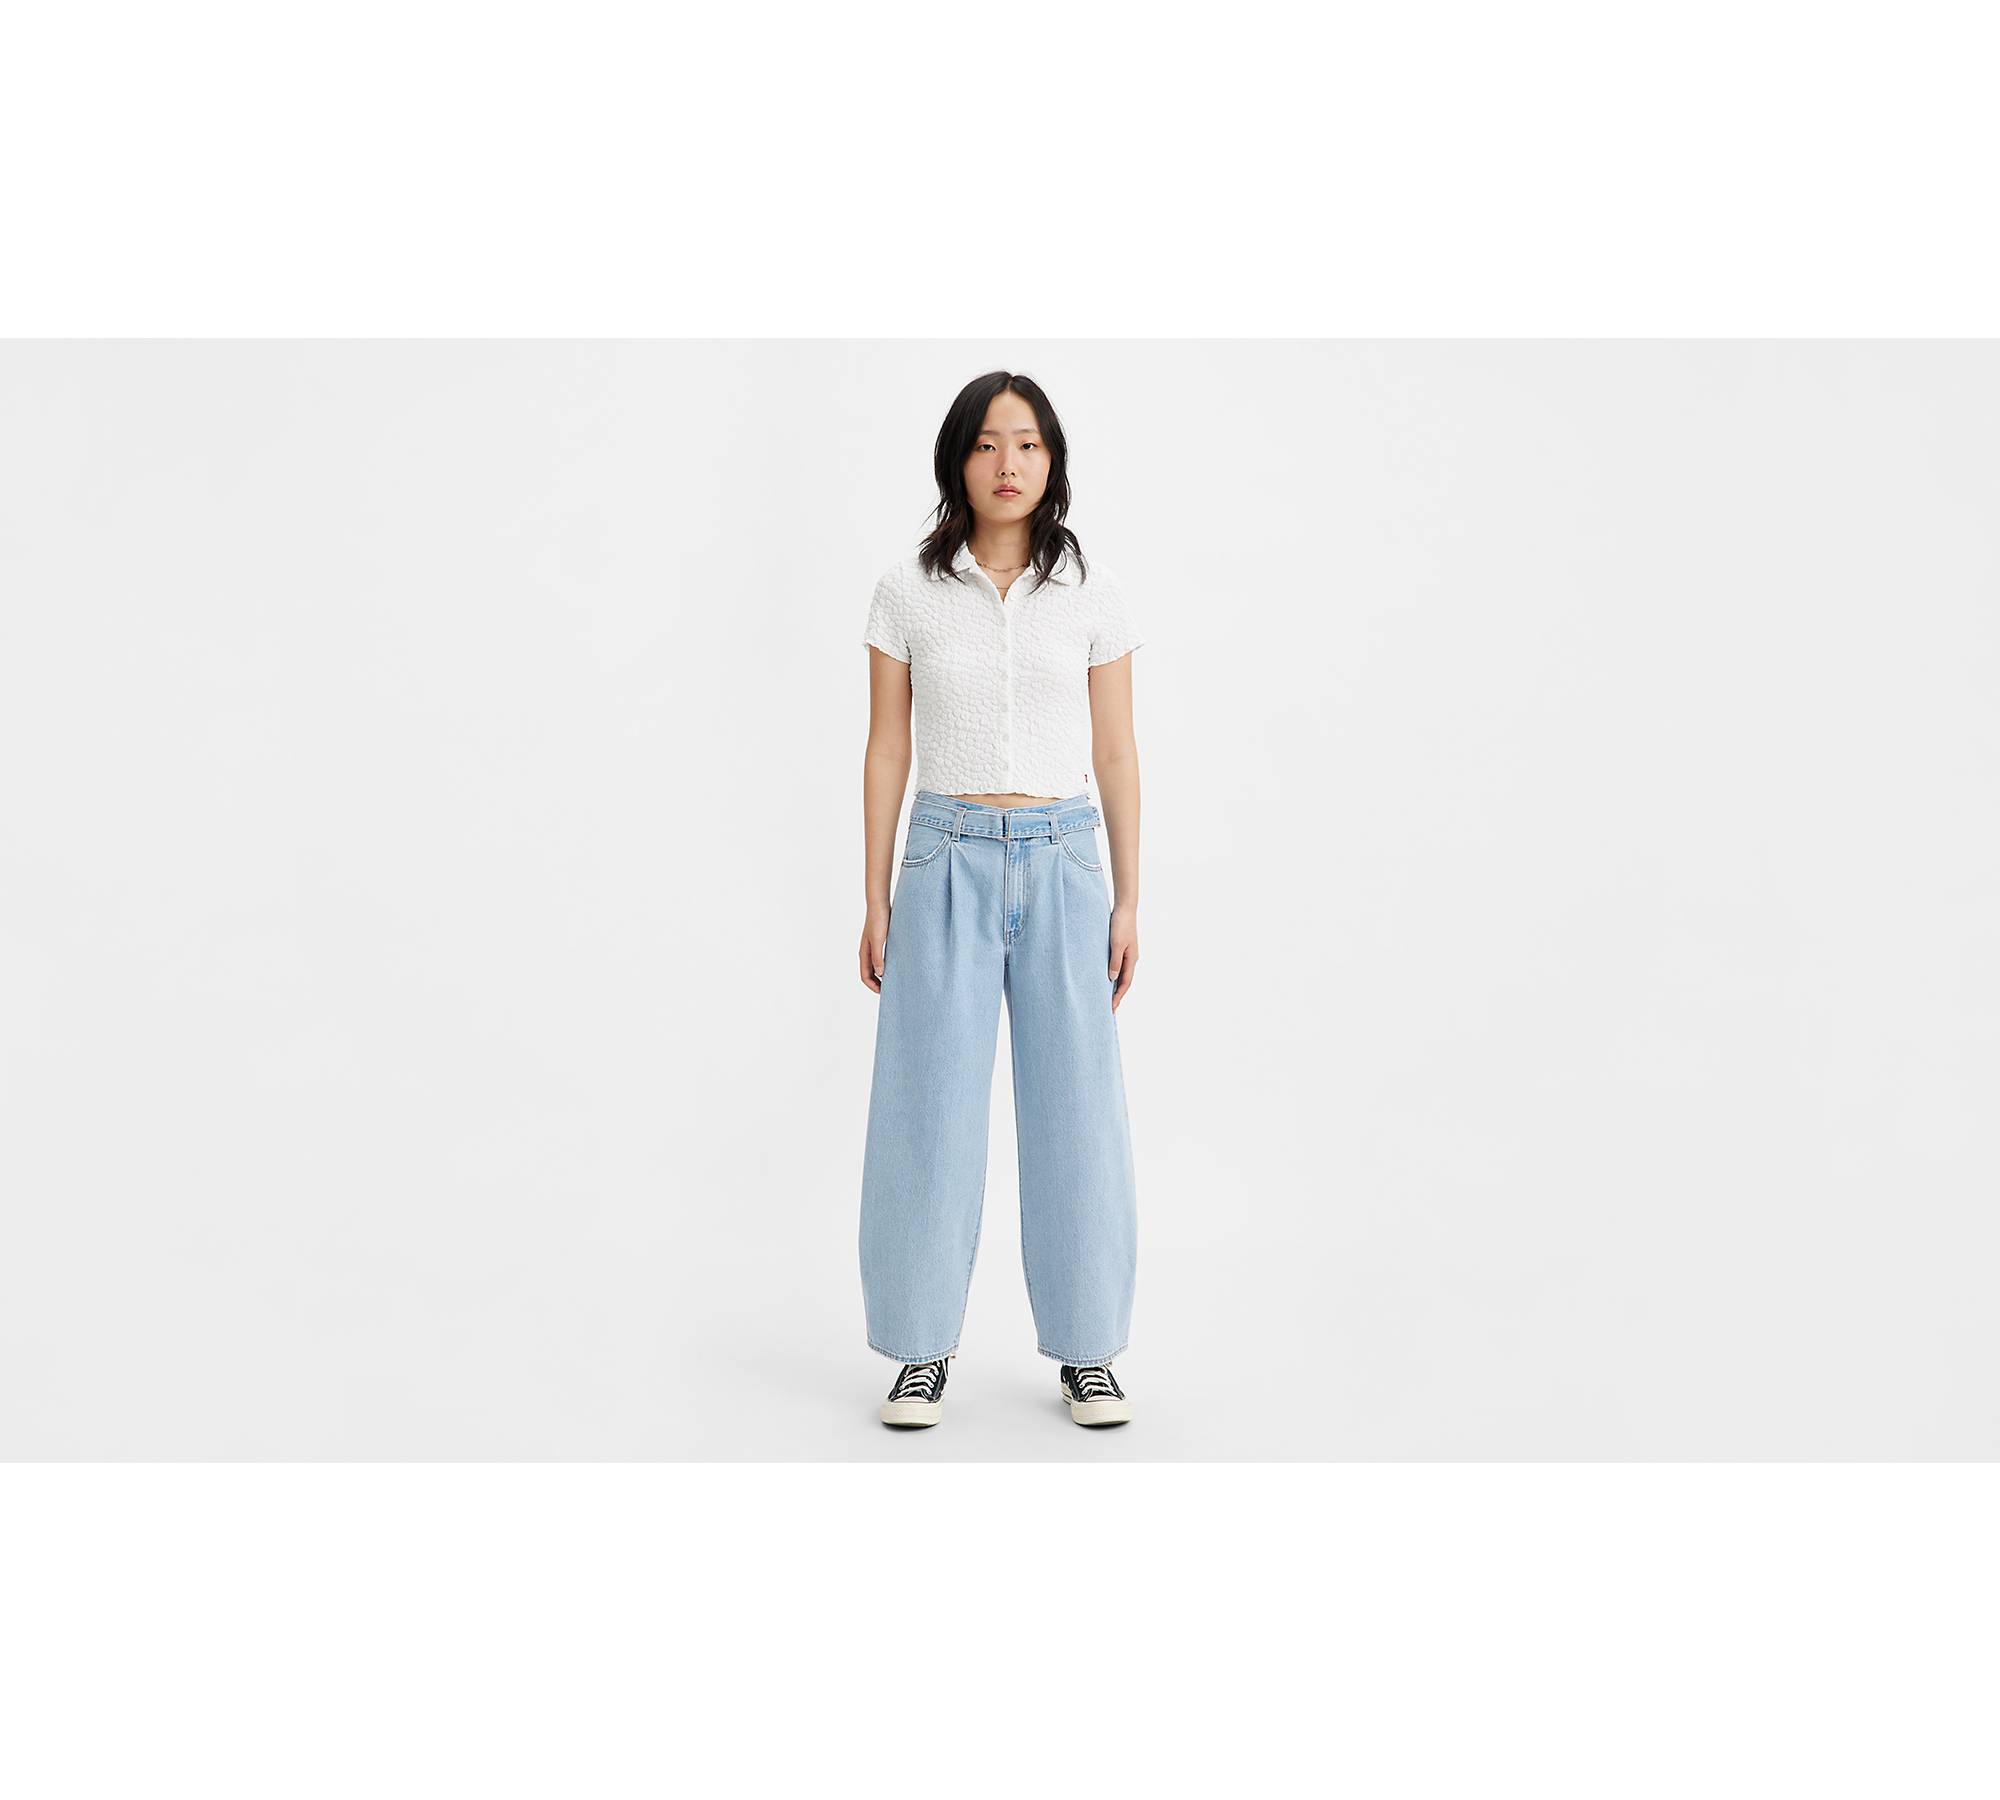 Belted Baggy Women's Jeans - Light Wash | Levi's® US